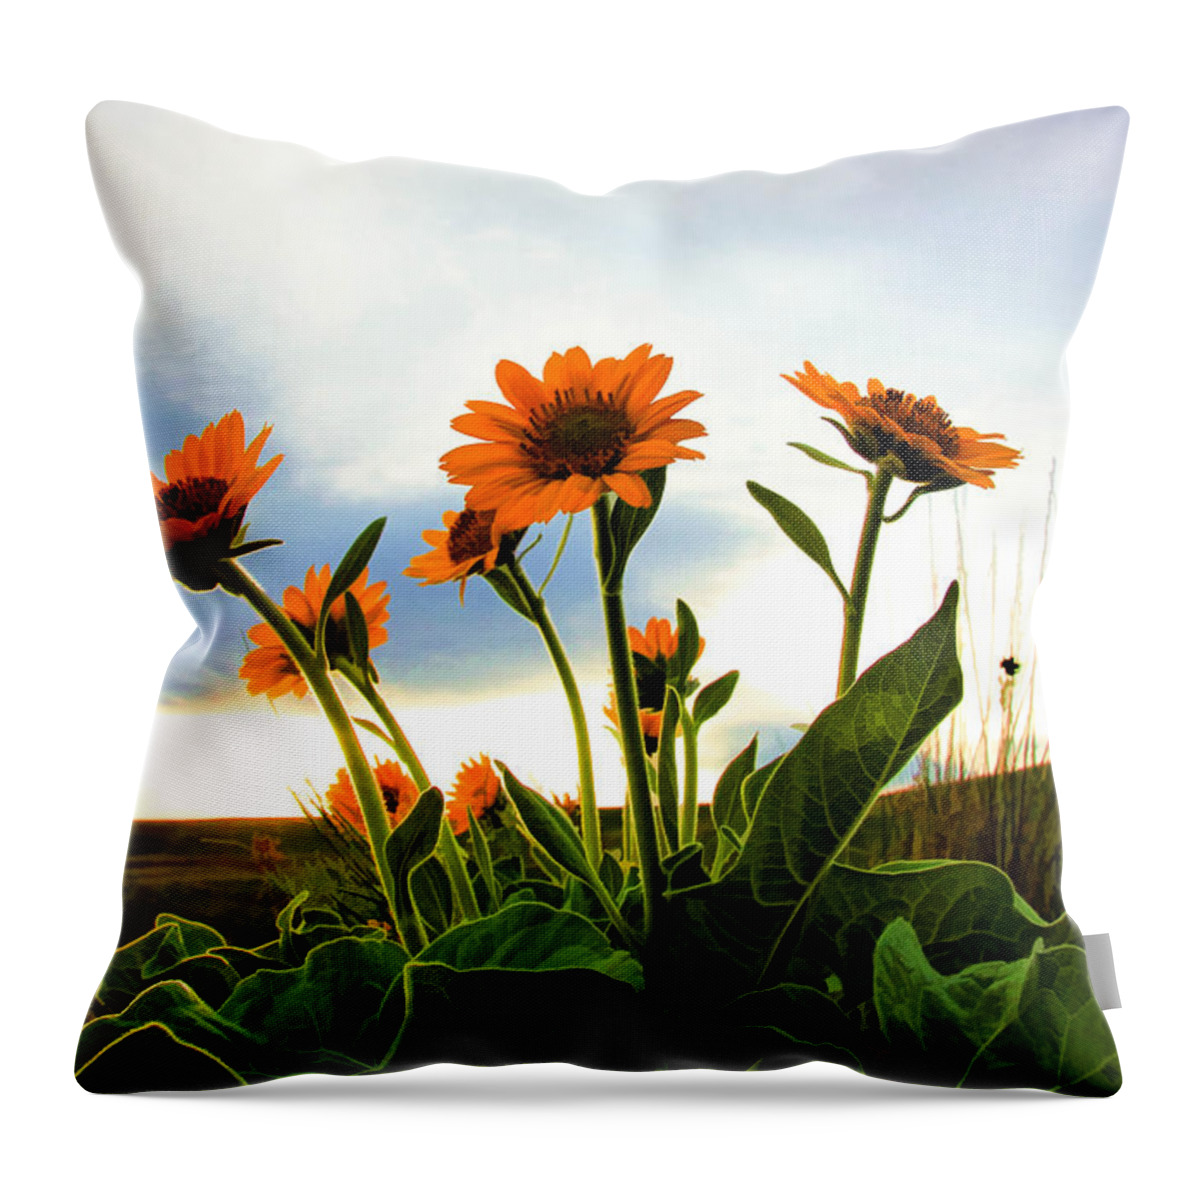 Wild Flowers Throw Pillow featuring the photograph Reach To The Heavens II by Athena Mckinzie